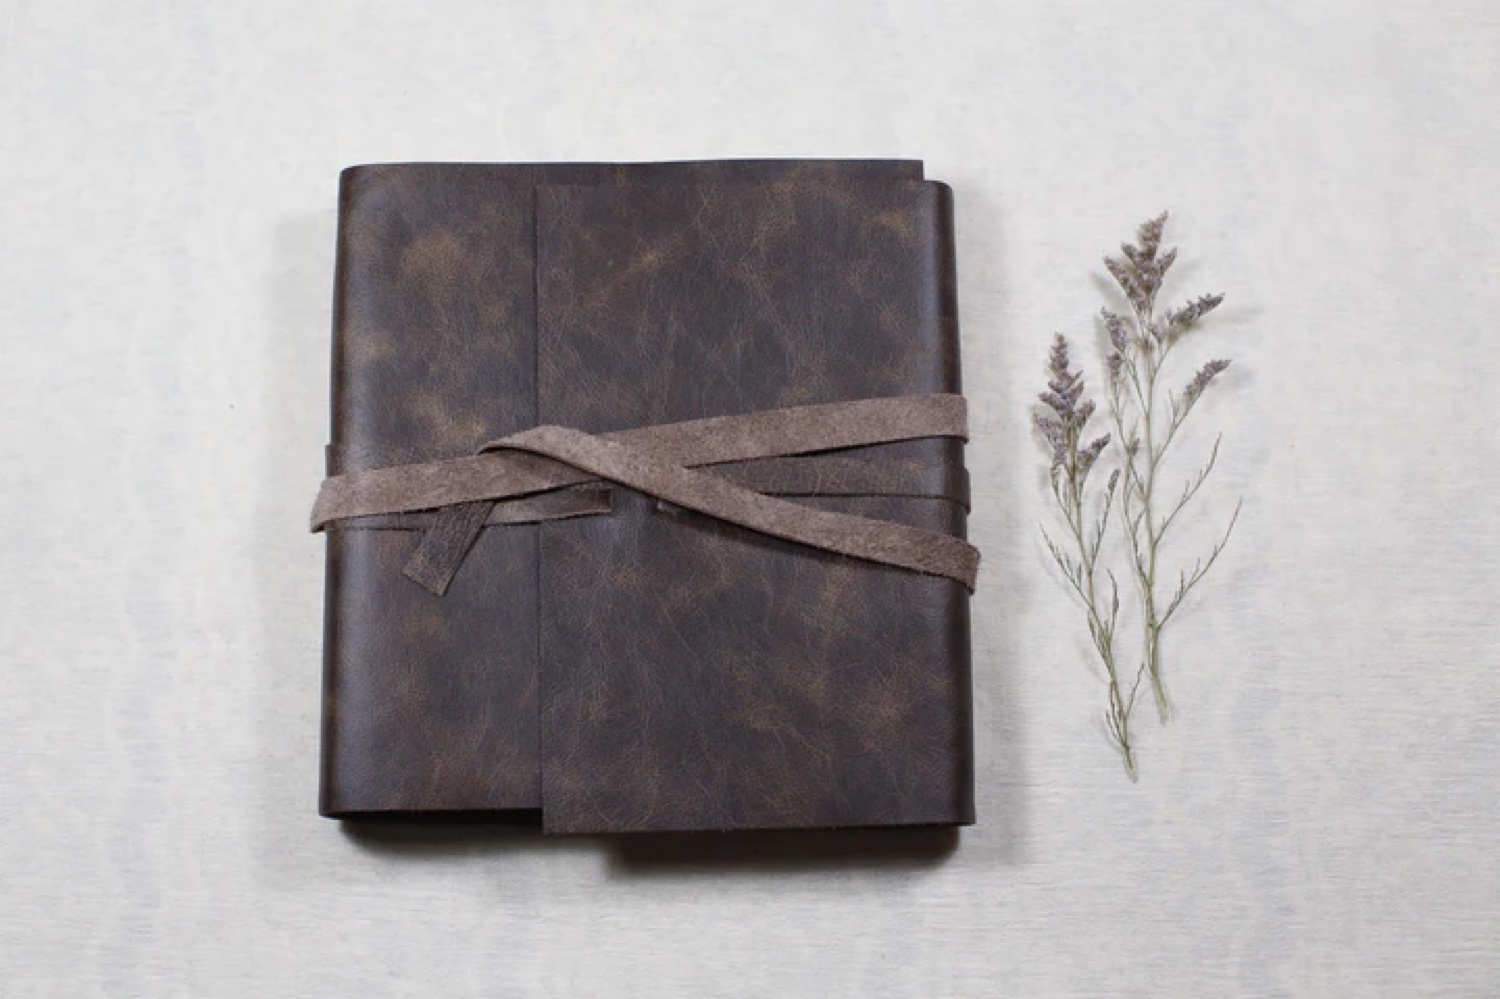 A brown leather journal with a ribbon tied around it.